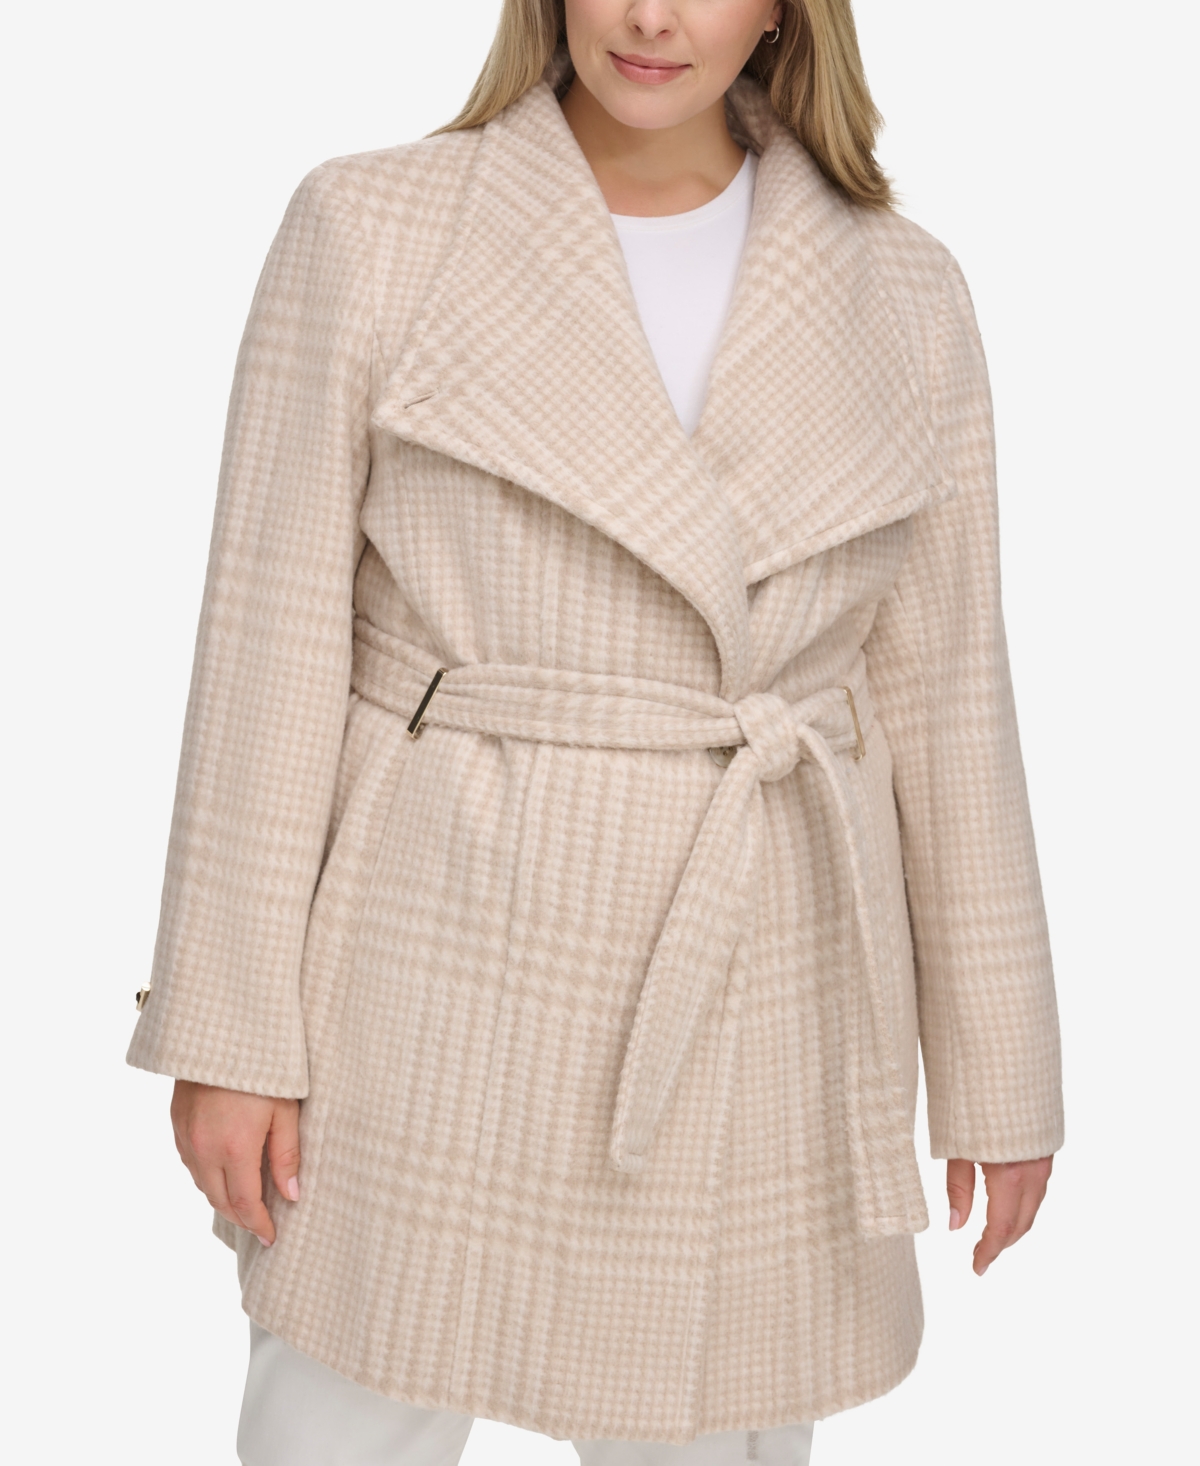 CALVIN KLEIN WOMEN'S PLUS SIZE ASYMMETRICAL BELTED WRAP COAT, CREATED FOR MACY'S